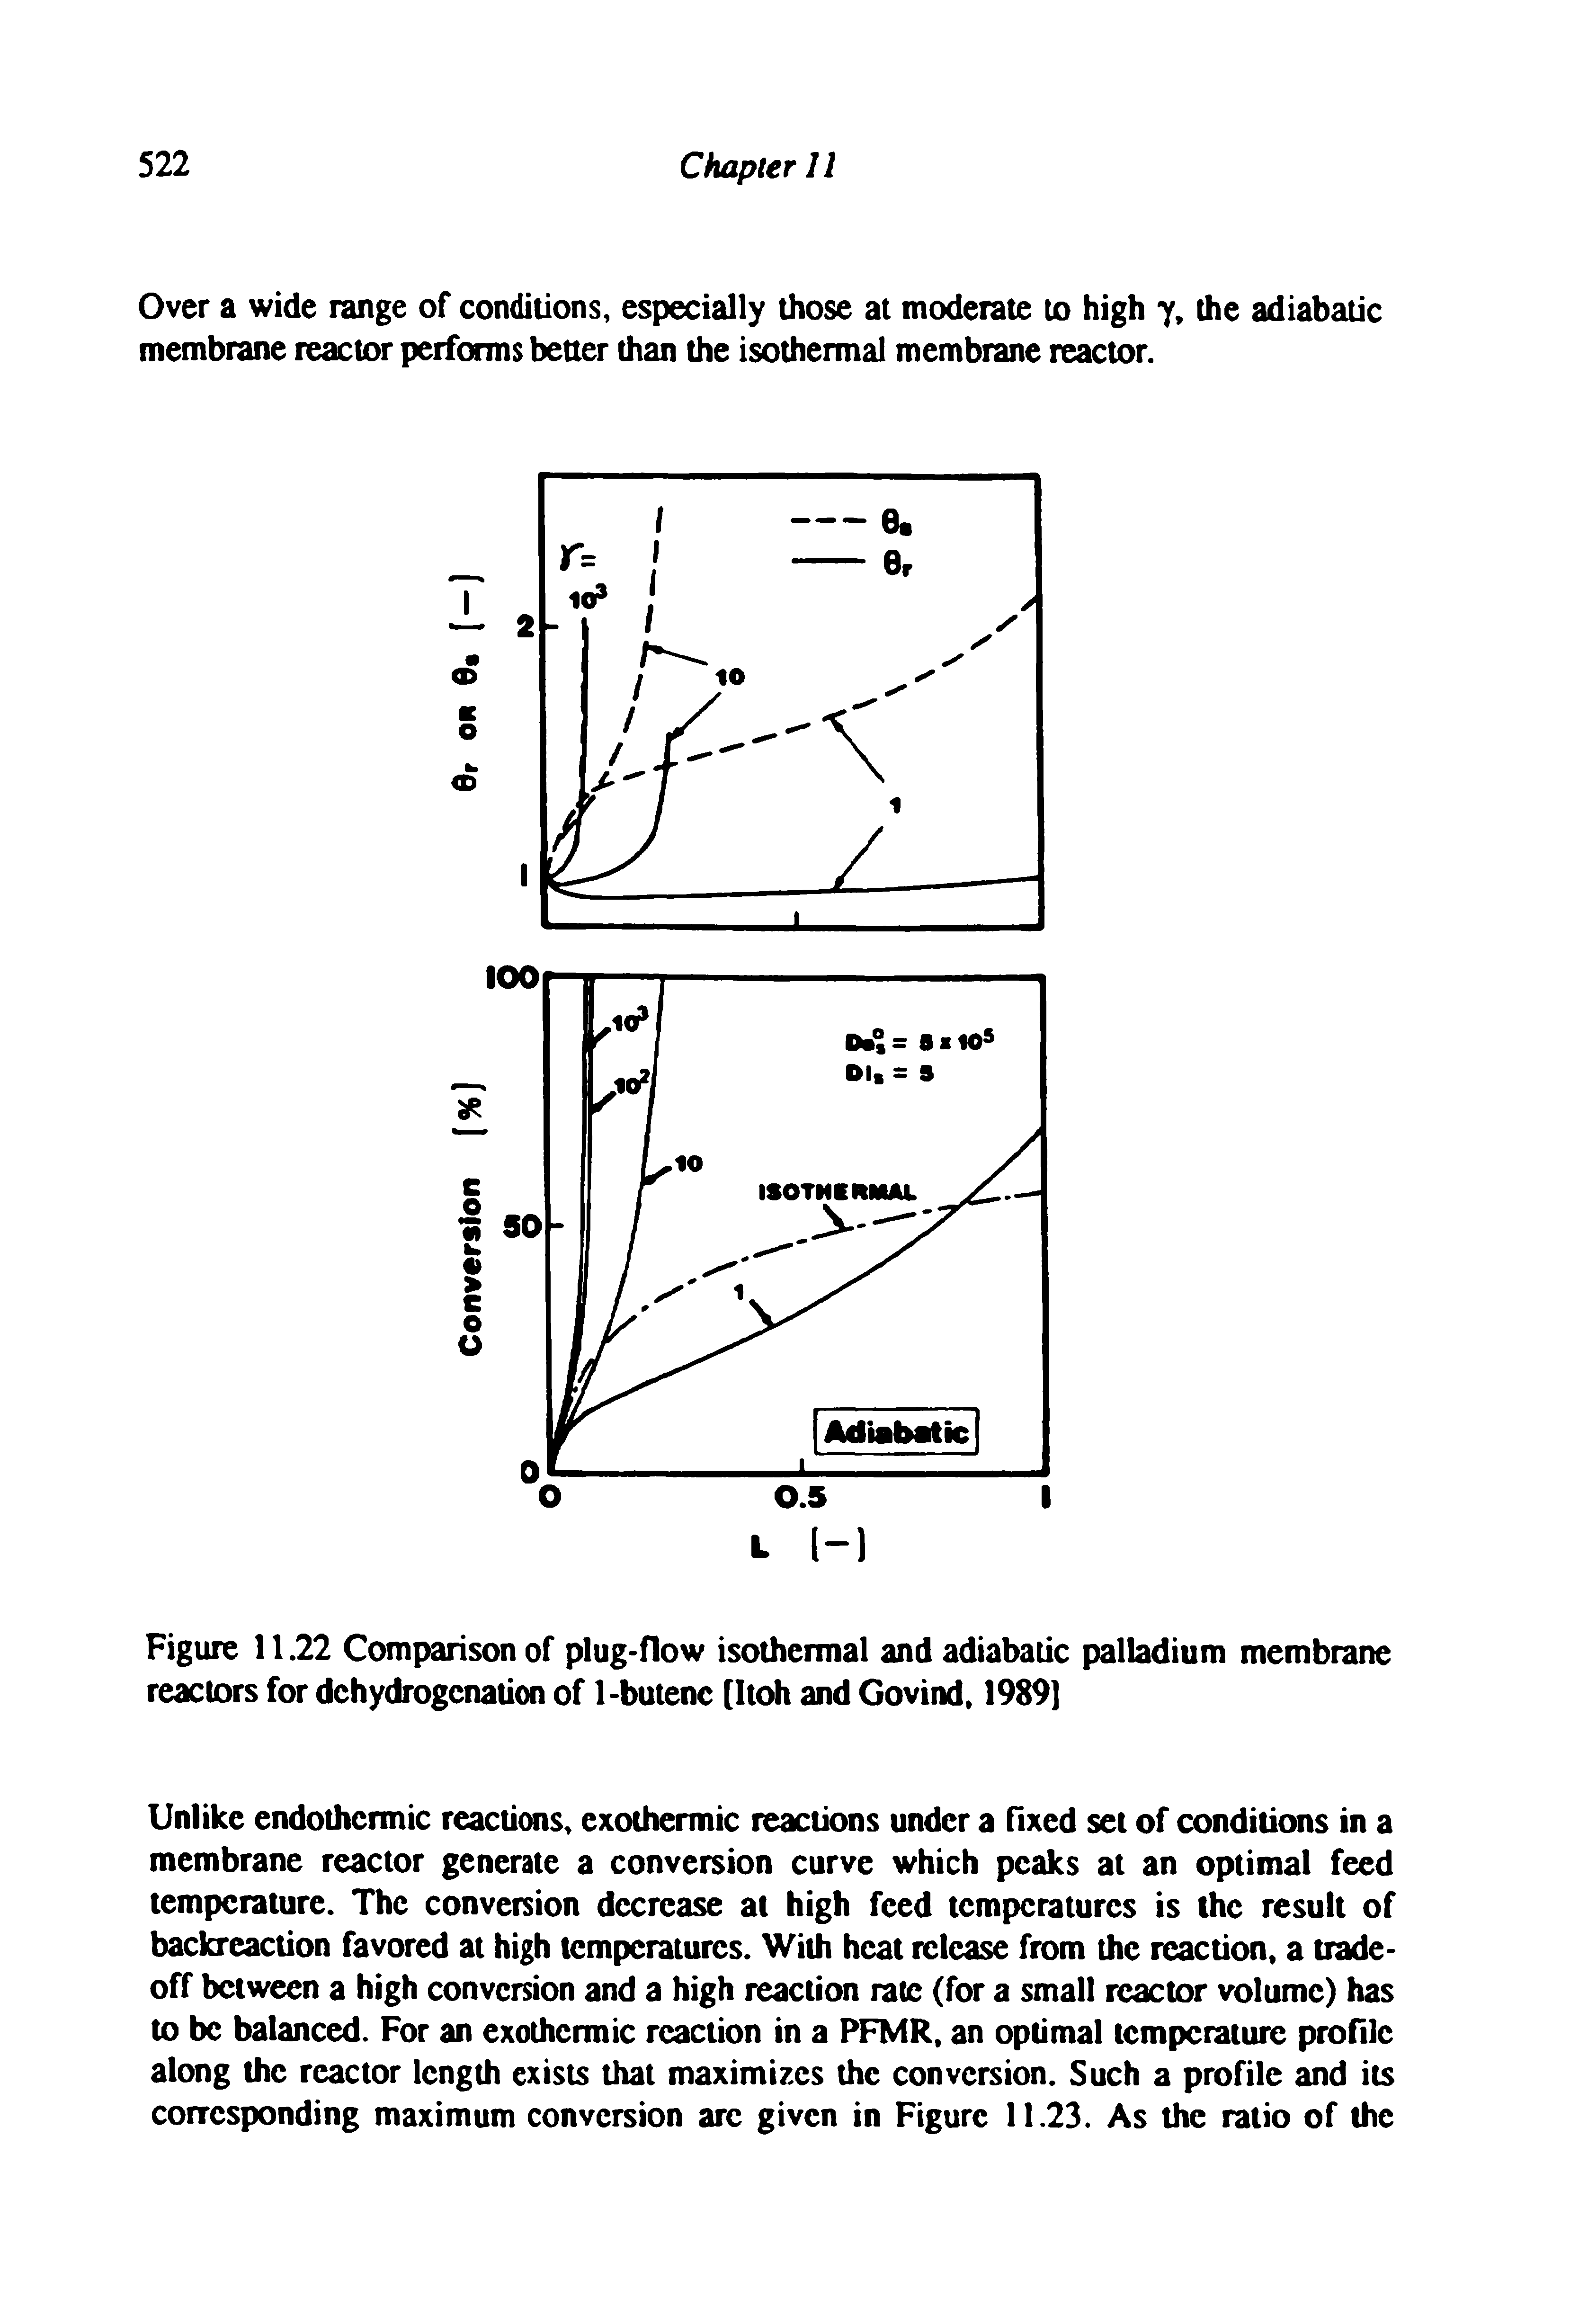 Figure 11.22 Comparison of plug-flow isothermal and adiabatic palladium membrane reactors for dehydrogenation of 1-butene [Itoh and Govind, 1989]...